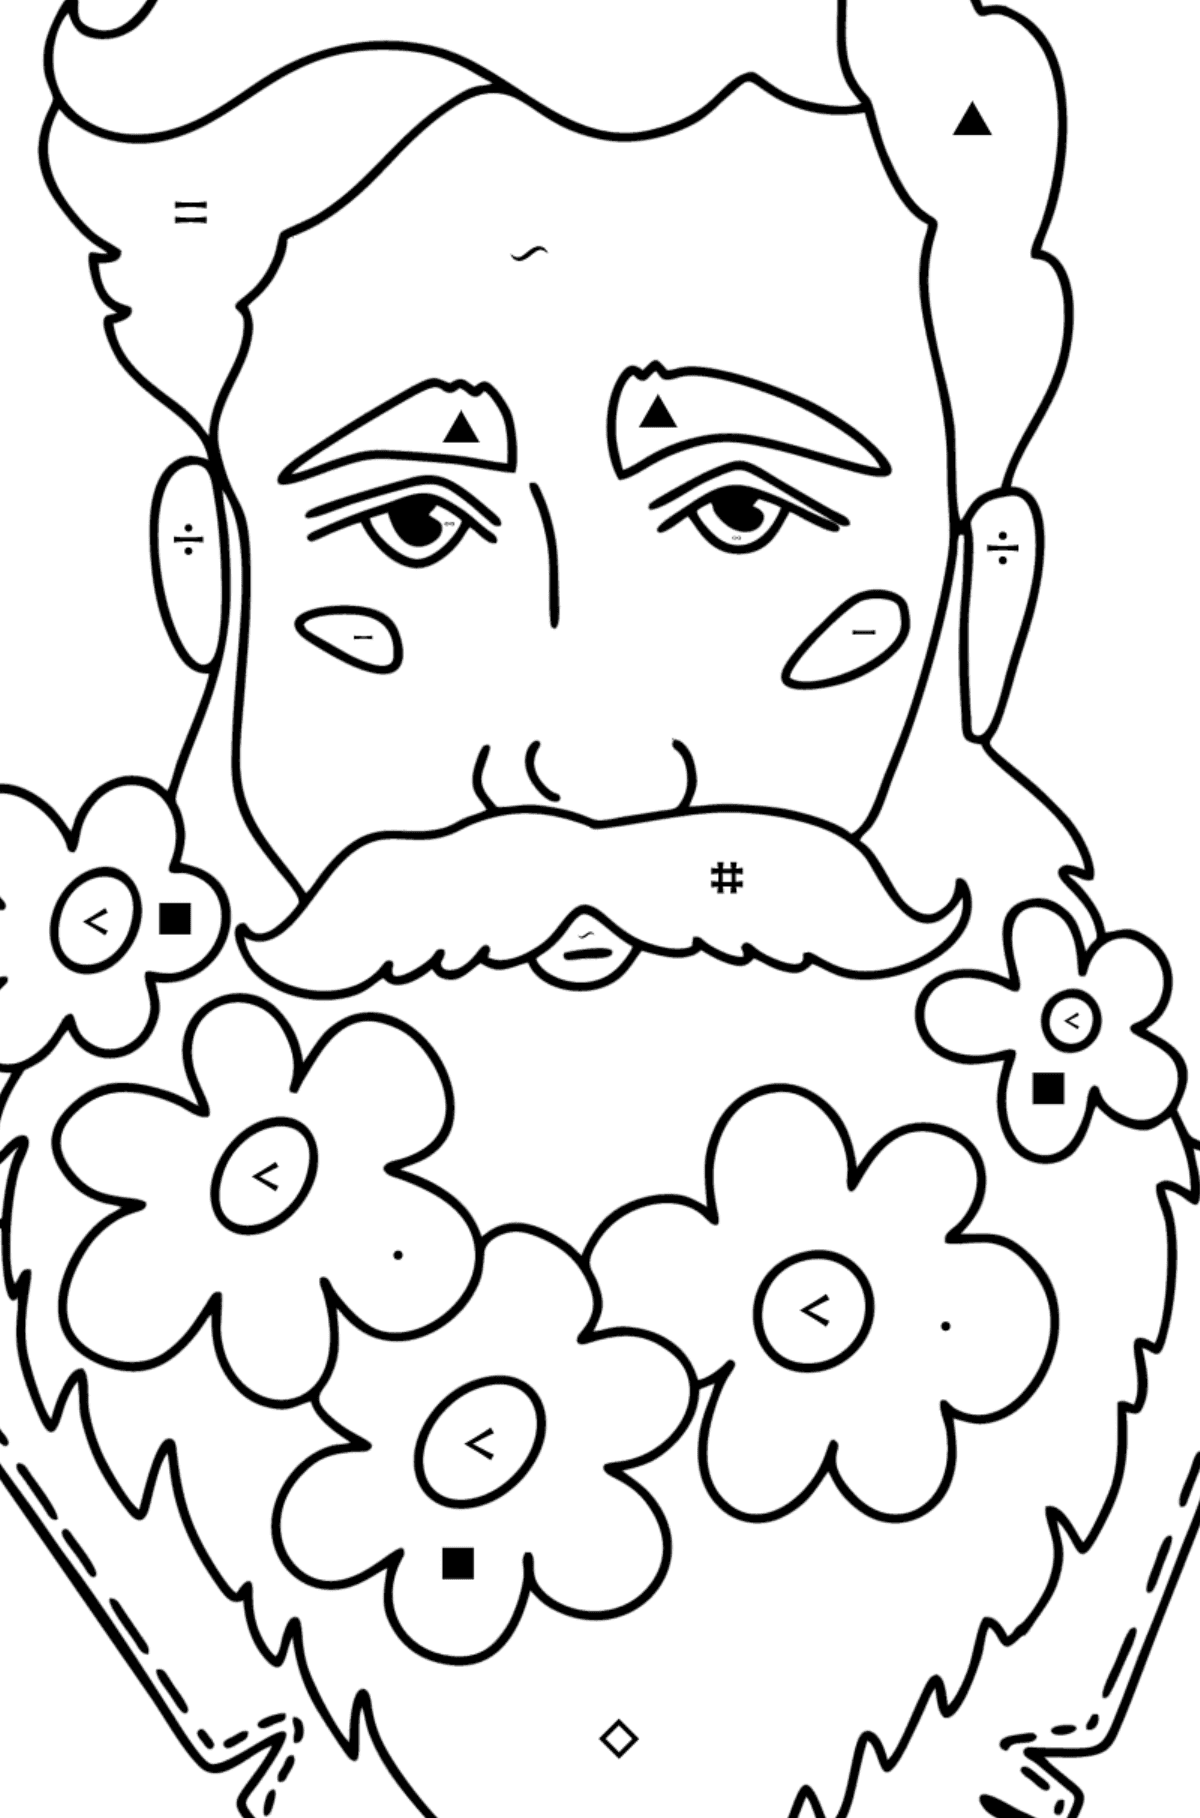 Young man with a beard сoloring page - Coloring by Symbols for Kids